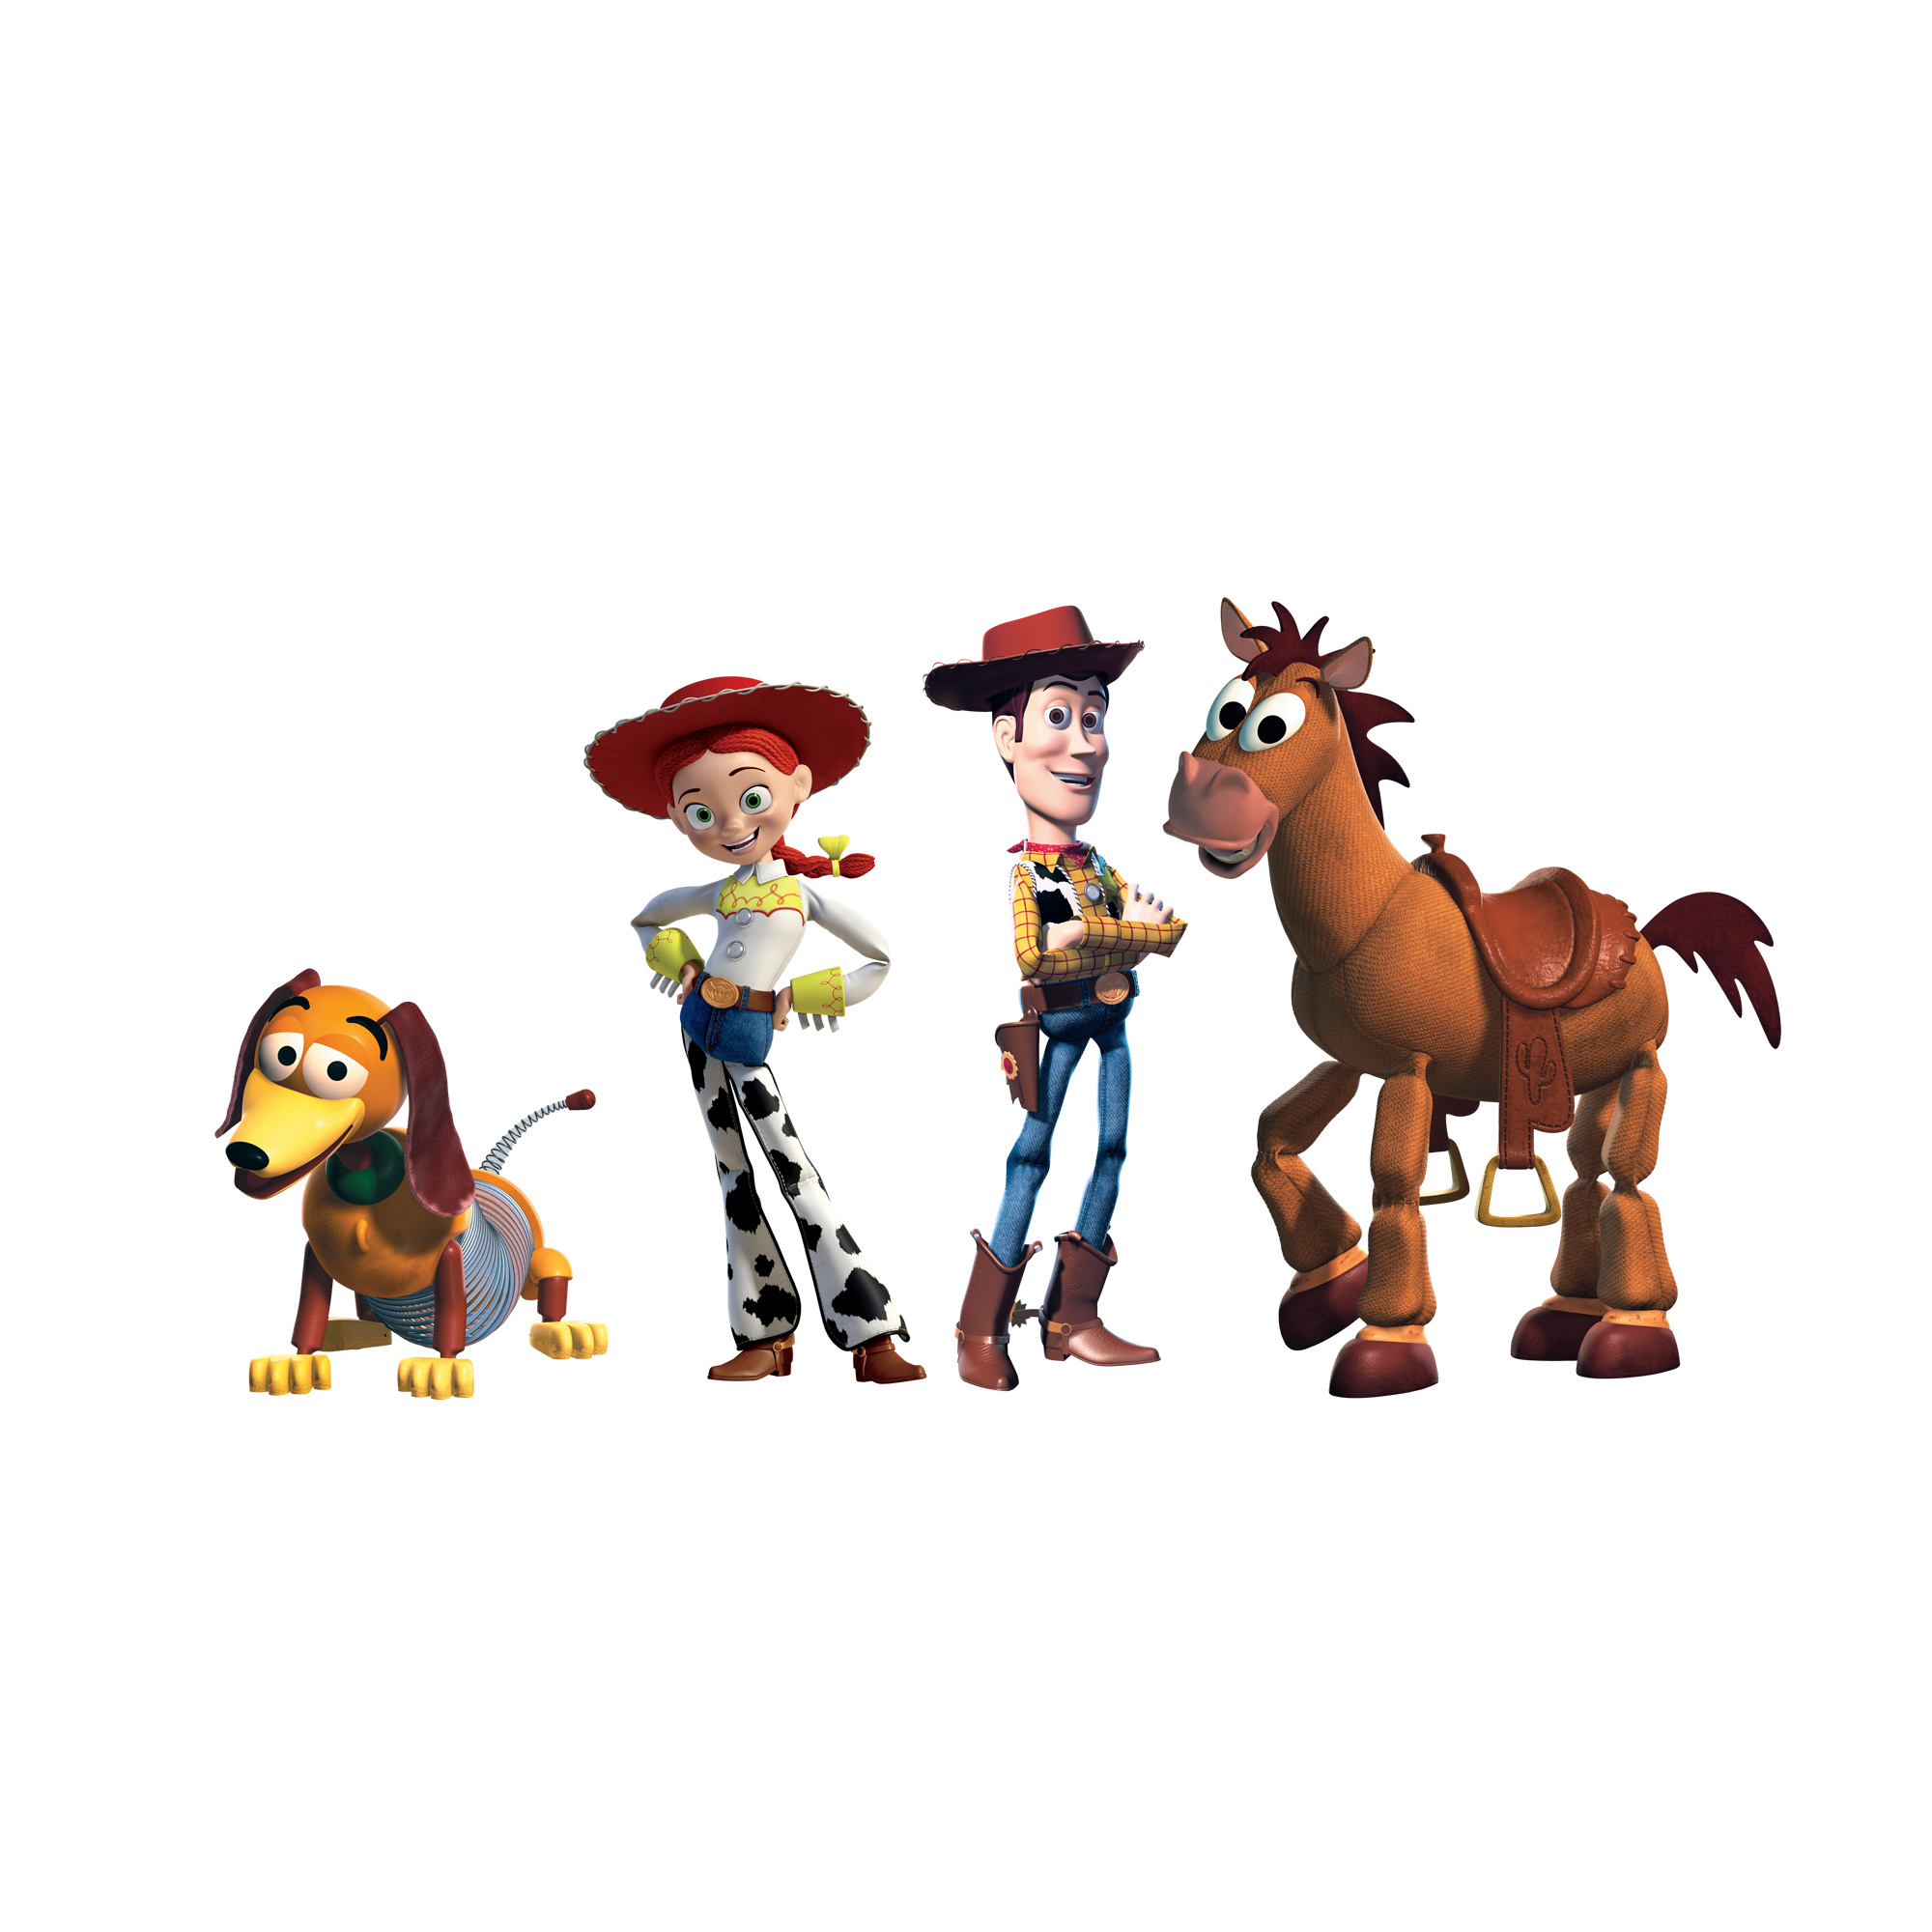 Toy Story 3 Characters Names : Movie Review Toy Story 3 Buzz Woody Et Al Learning Life S Harder Lessons Npr / Information about toy story 3 characters names.